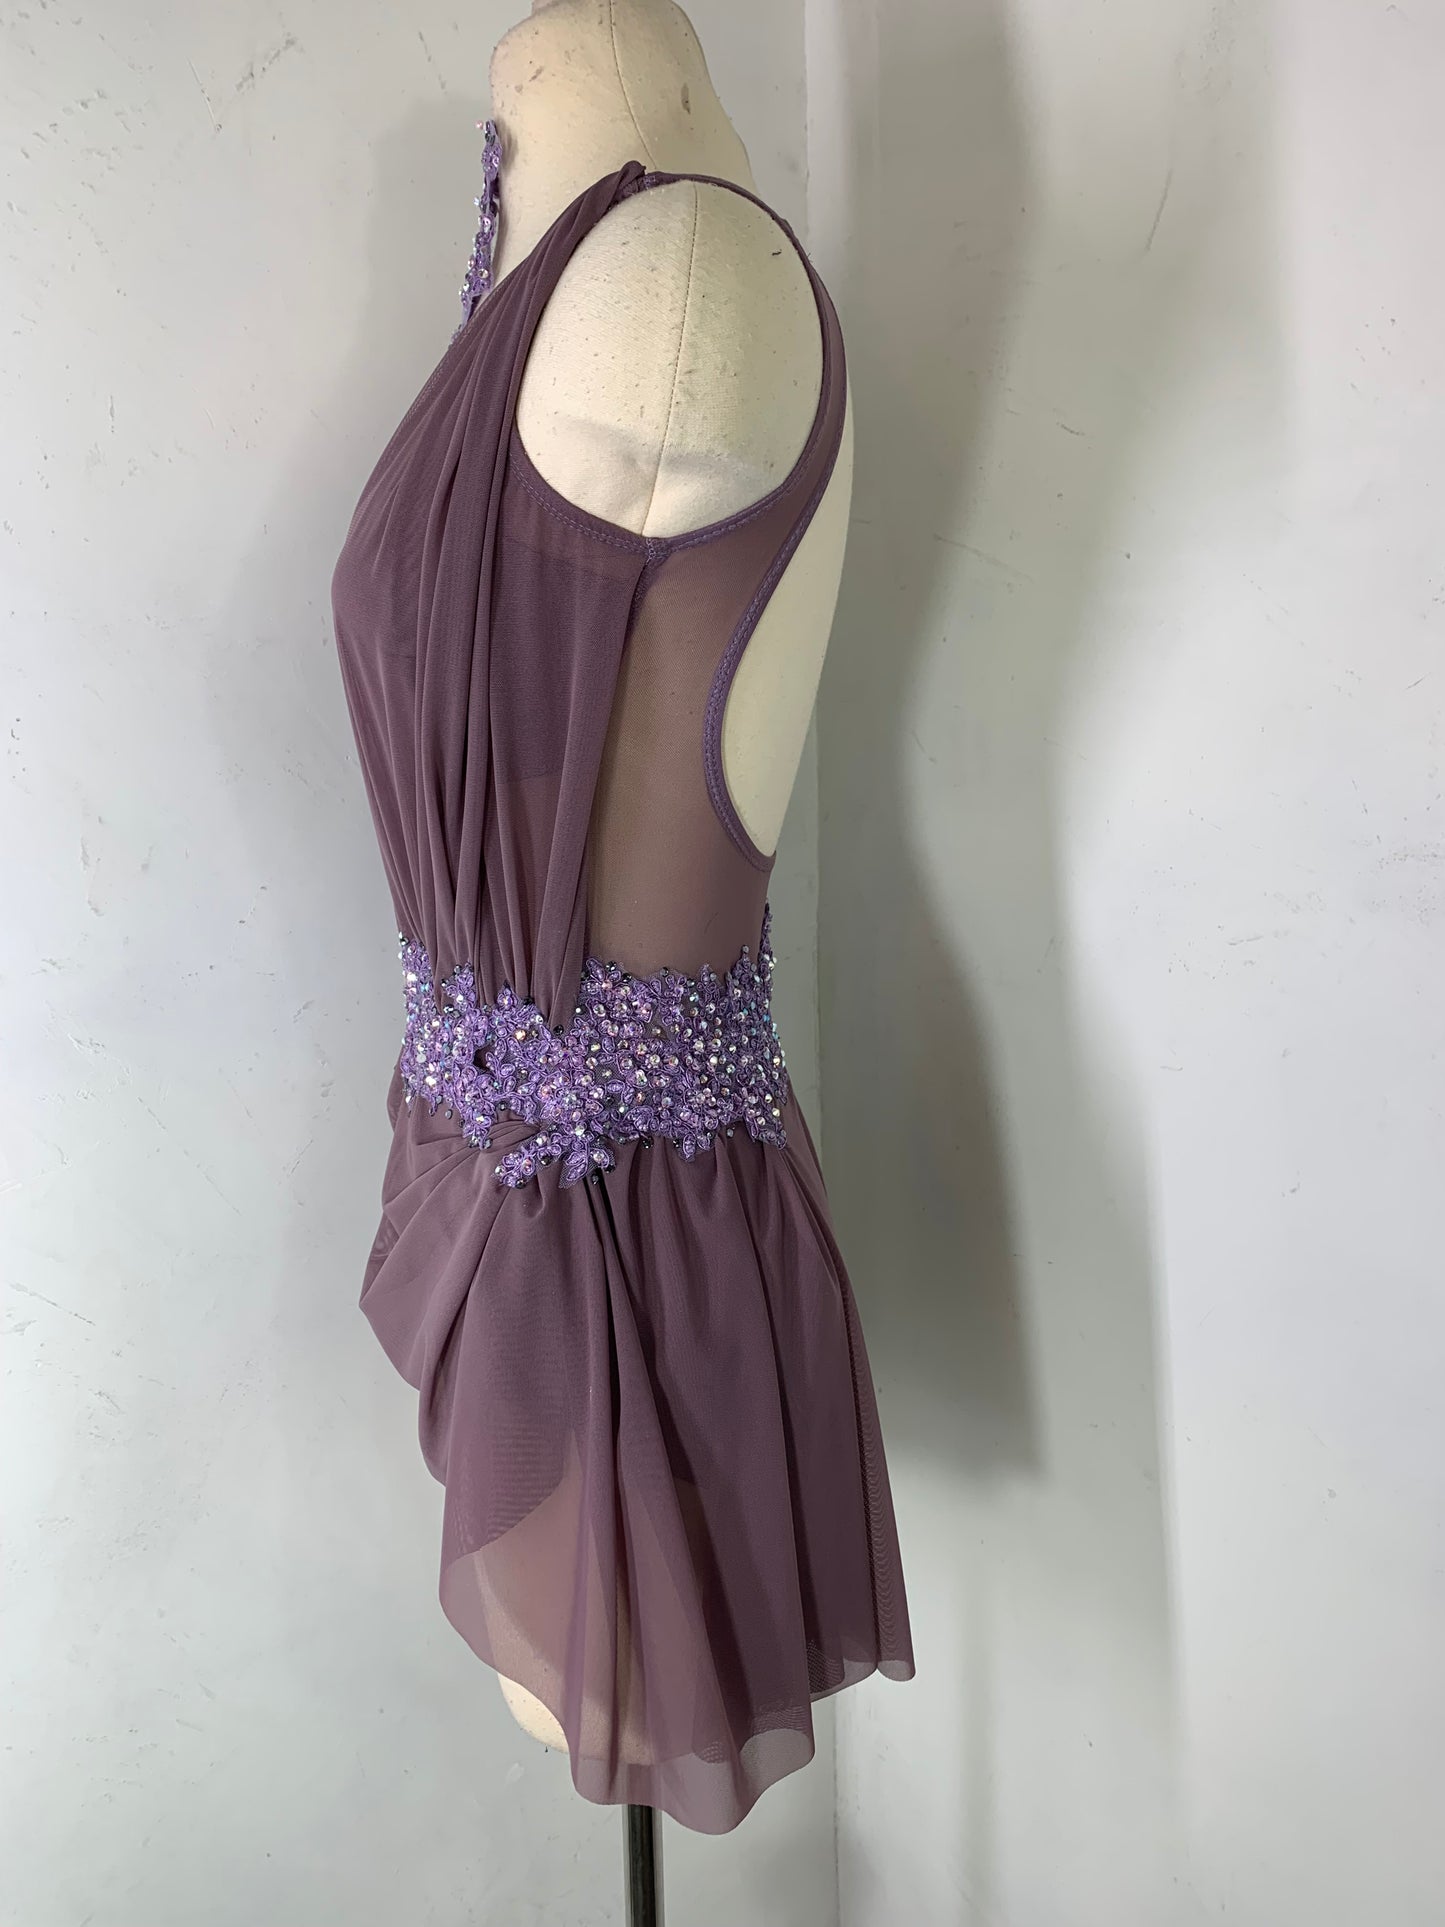 Dusty Amethyst draped Sage costume with crystal ab stones and appliques